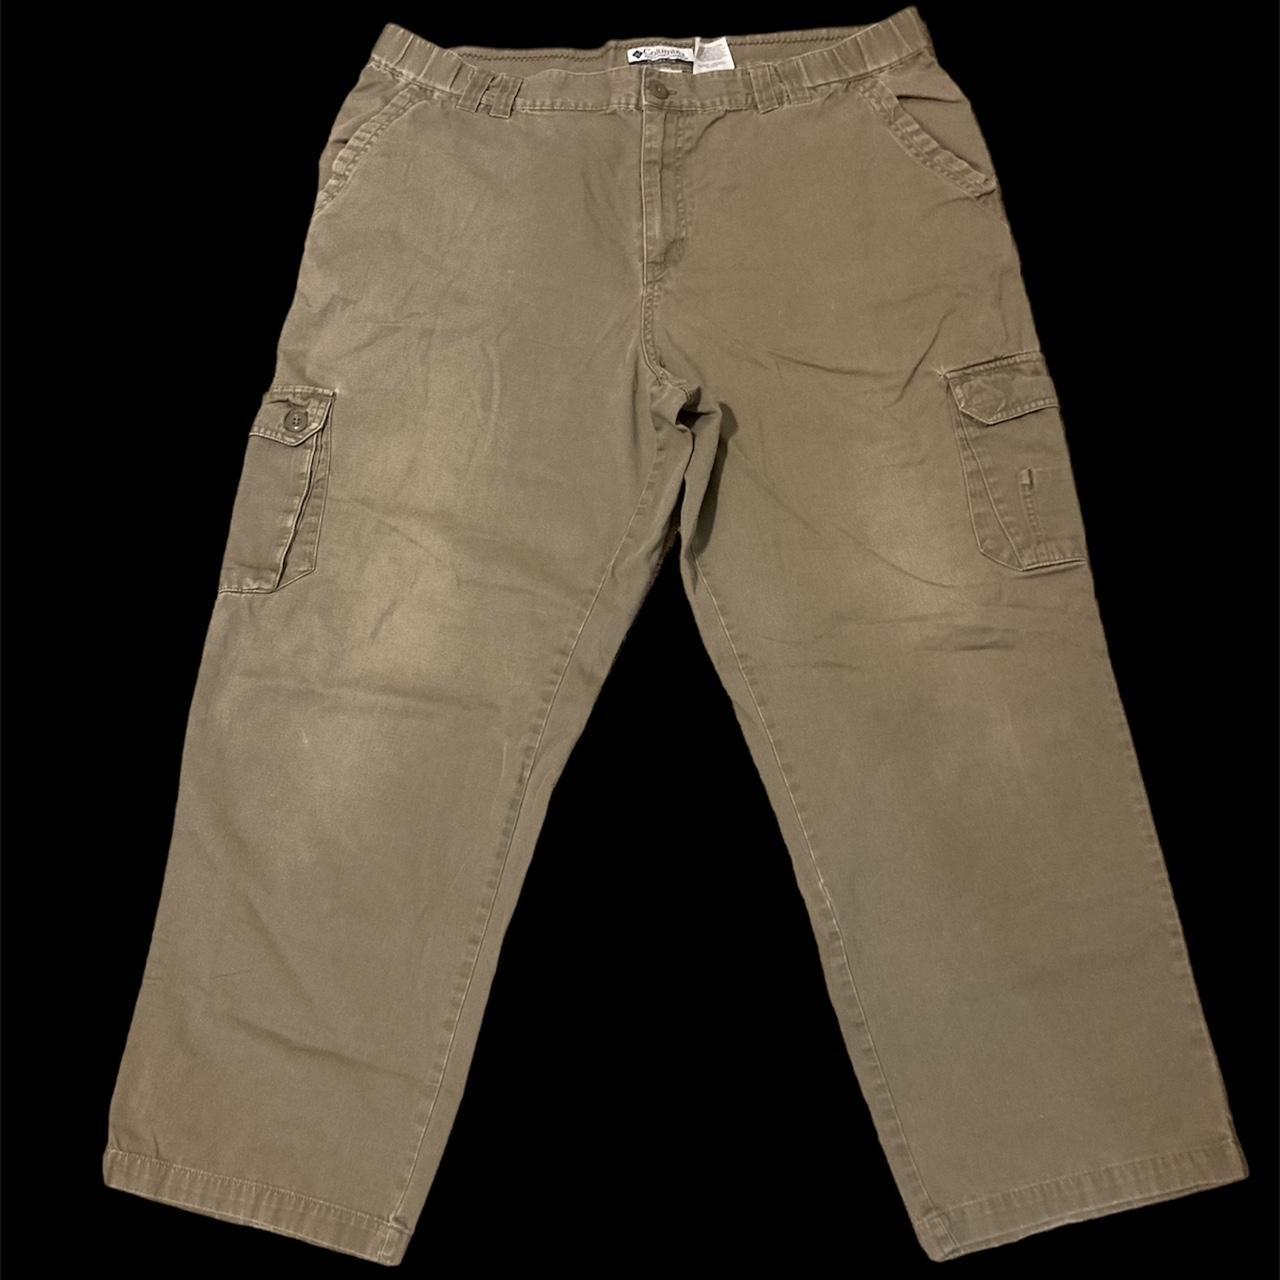 Hiking Trousers • Shop The Cheap Clothing, Shoes, Accessories - Columbia •  Ronak Press